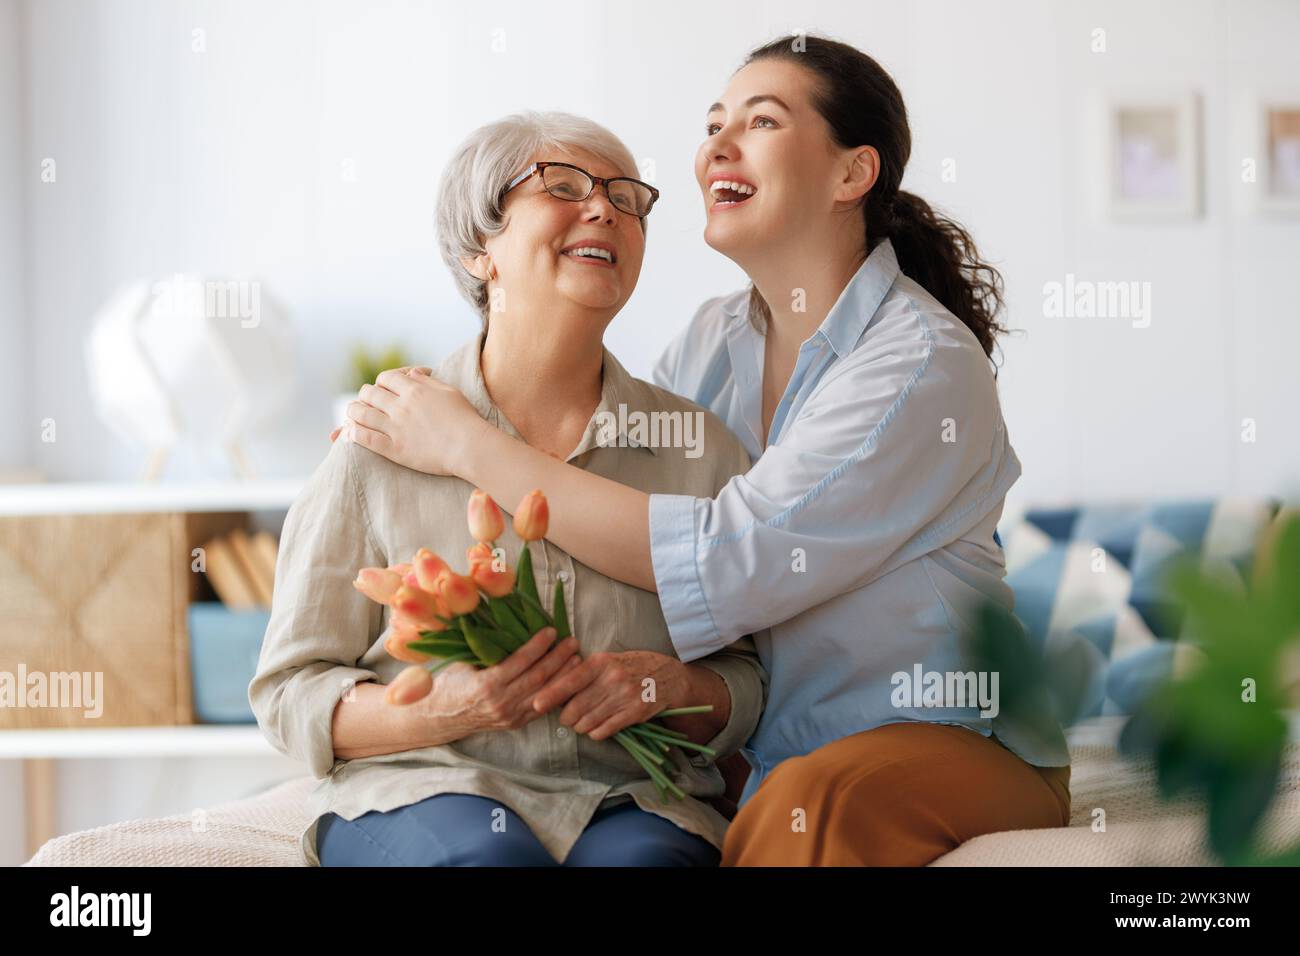 Beautiful young woman and her mother with flowers tulips in hands at home. Stock Photo